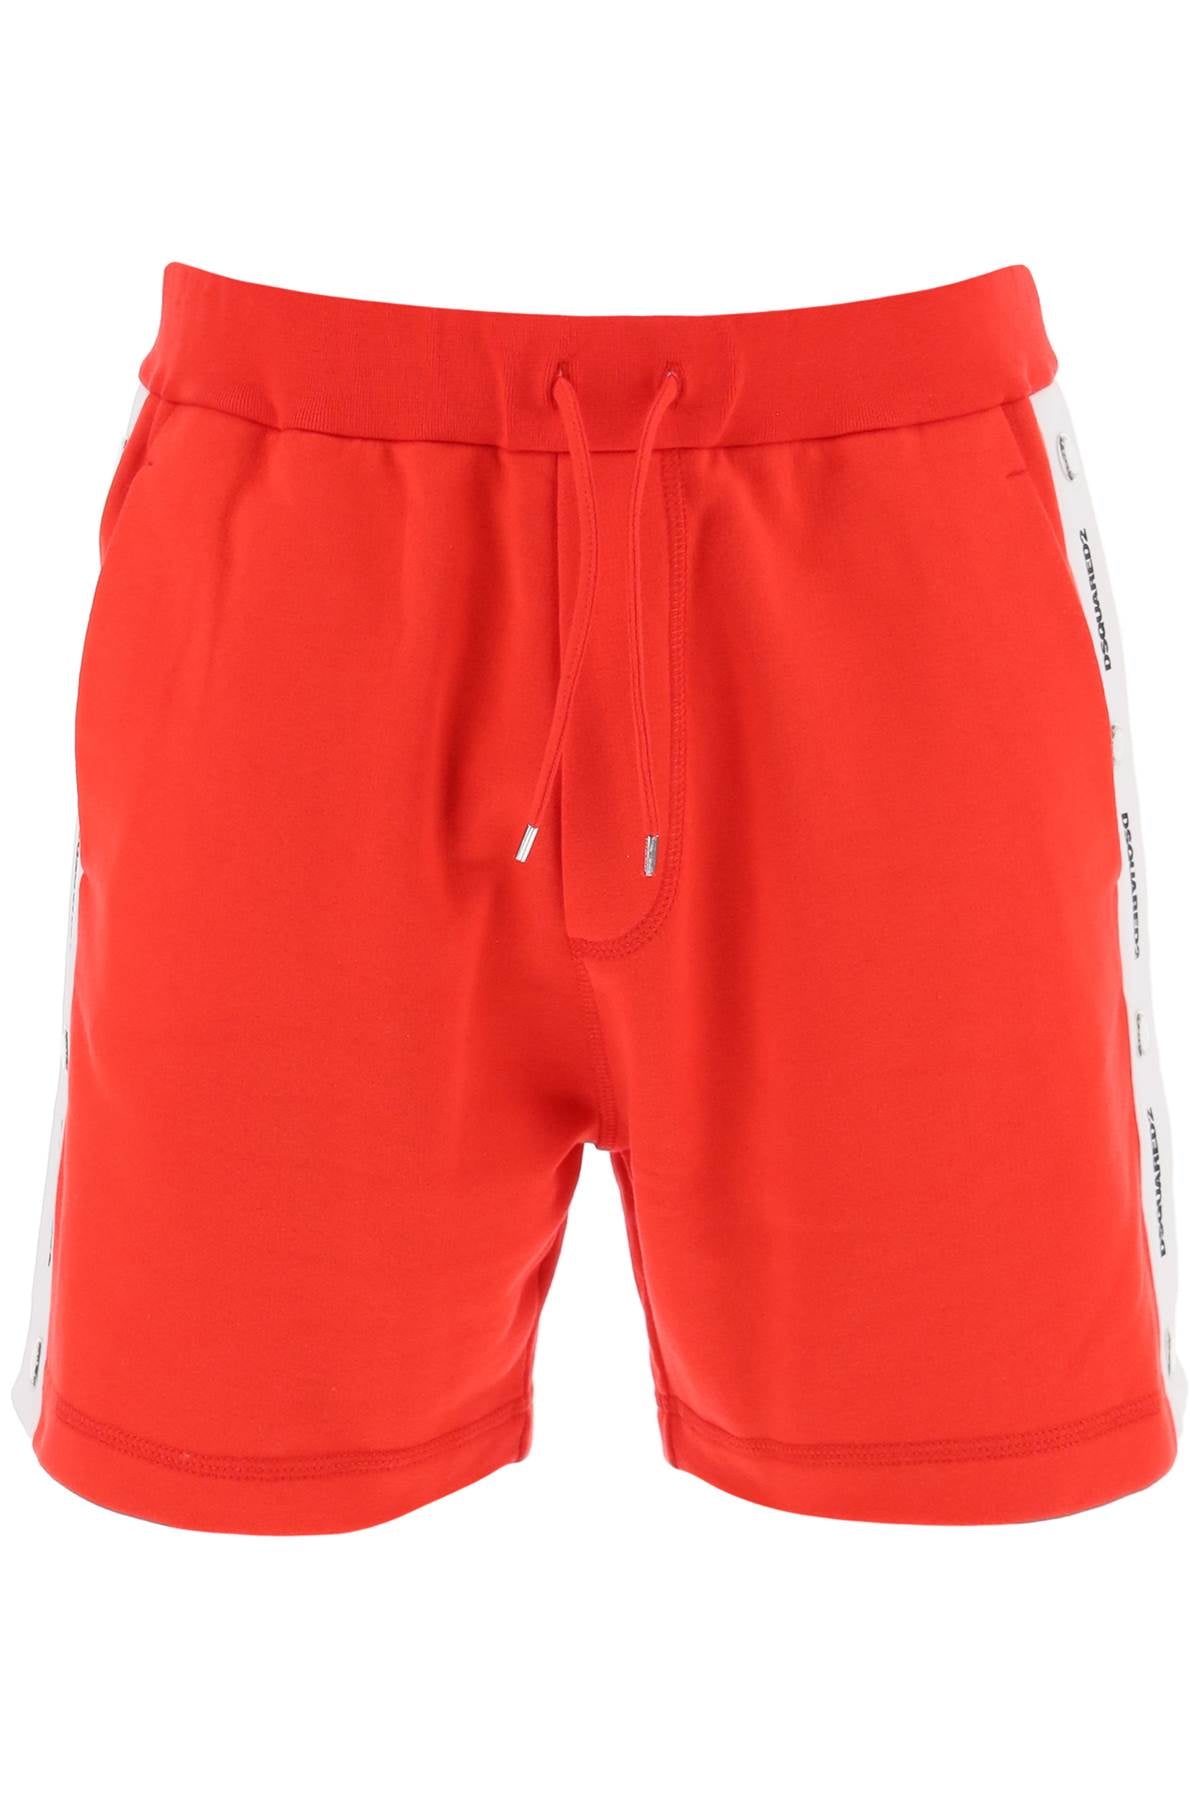 Dsquared2 burbs sweatshorts with logo bands-0